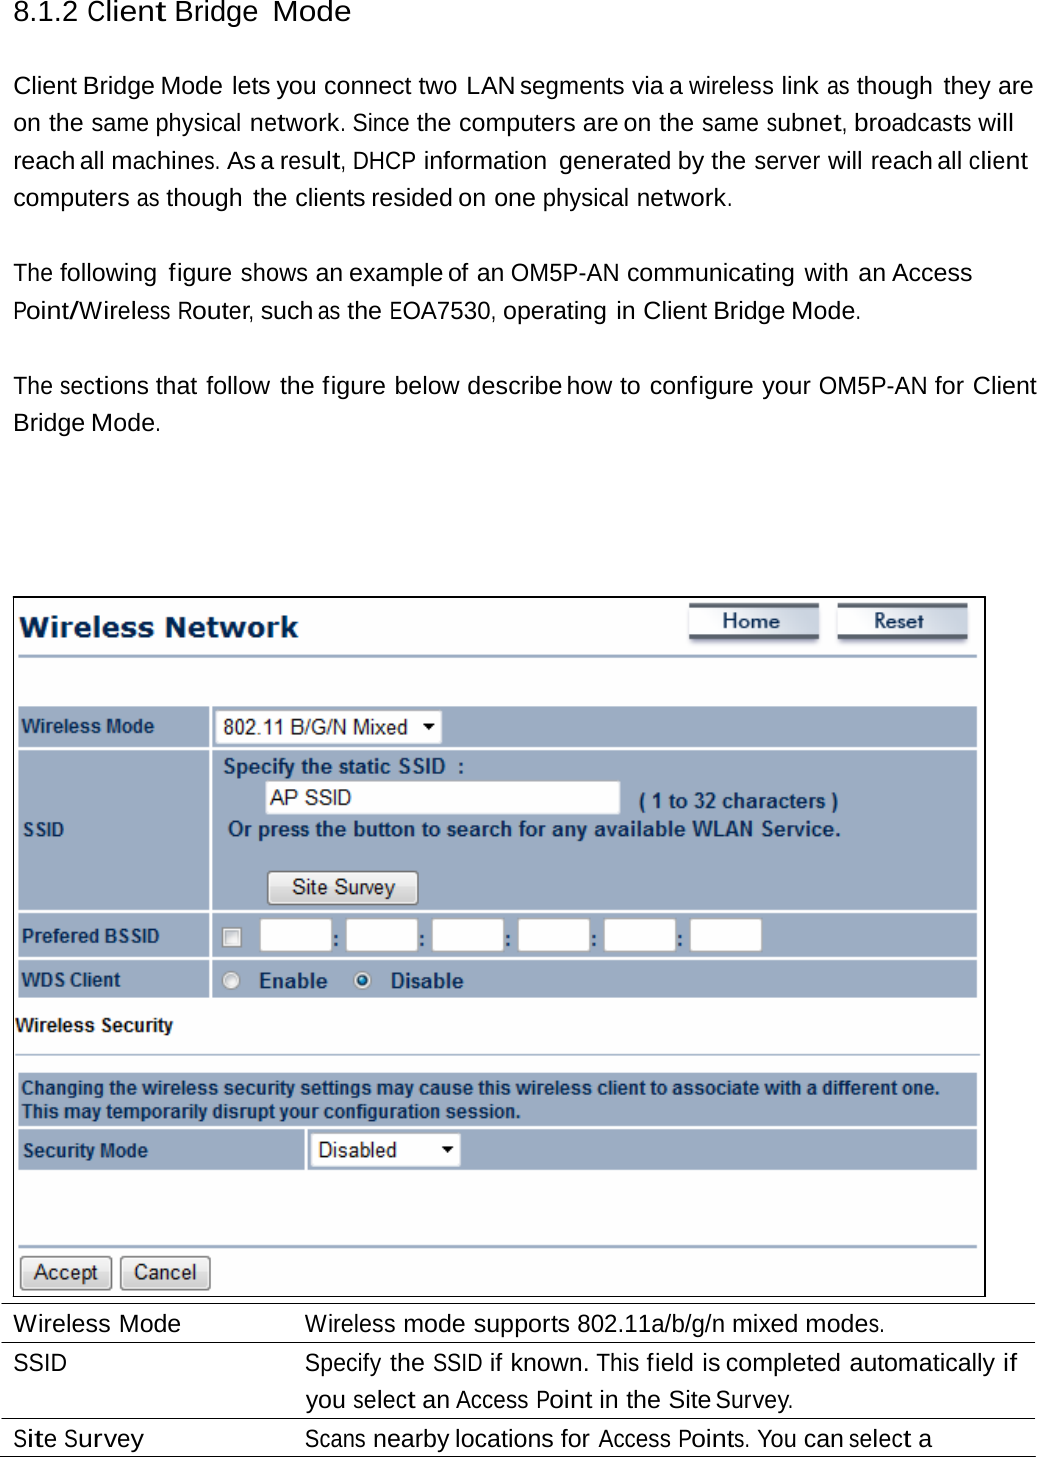 8.1.2 Client Bridge Mode Client Bridge Mode lets you connect two LAN segments via a wireless link as though they are on the same physical network. Since the computers are on the same subnet, broadcasts will reach all machines. As a result, DHCP information generated by the server will reach all client computers as though the clients resided on one physical network. The following figure shows an example of an OM5P-AN communicating with an Access Point/Wireless Router, such as the EOA7530, operating in Client Bridge Mode. The sections that follow the figure below describe how  to  configure  your OM5P-AN for Client Bridge Mode. Wireless Mode  Wireless mode supports 802.11a/b/g/n mixed modes. SSID Specify the SSID if known. This field is completed automatically if you select an Access Point in the Site Survey. Site Survey Scans nearby locations for Access Points. You can select a 